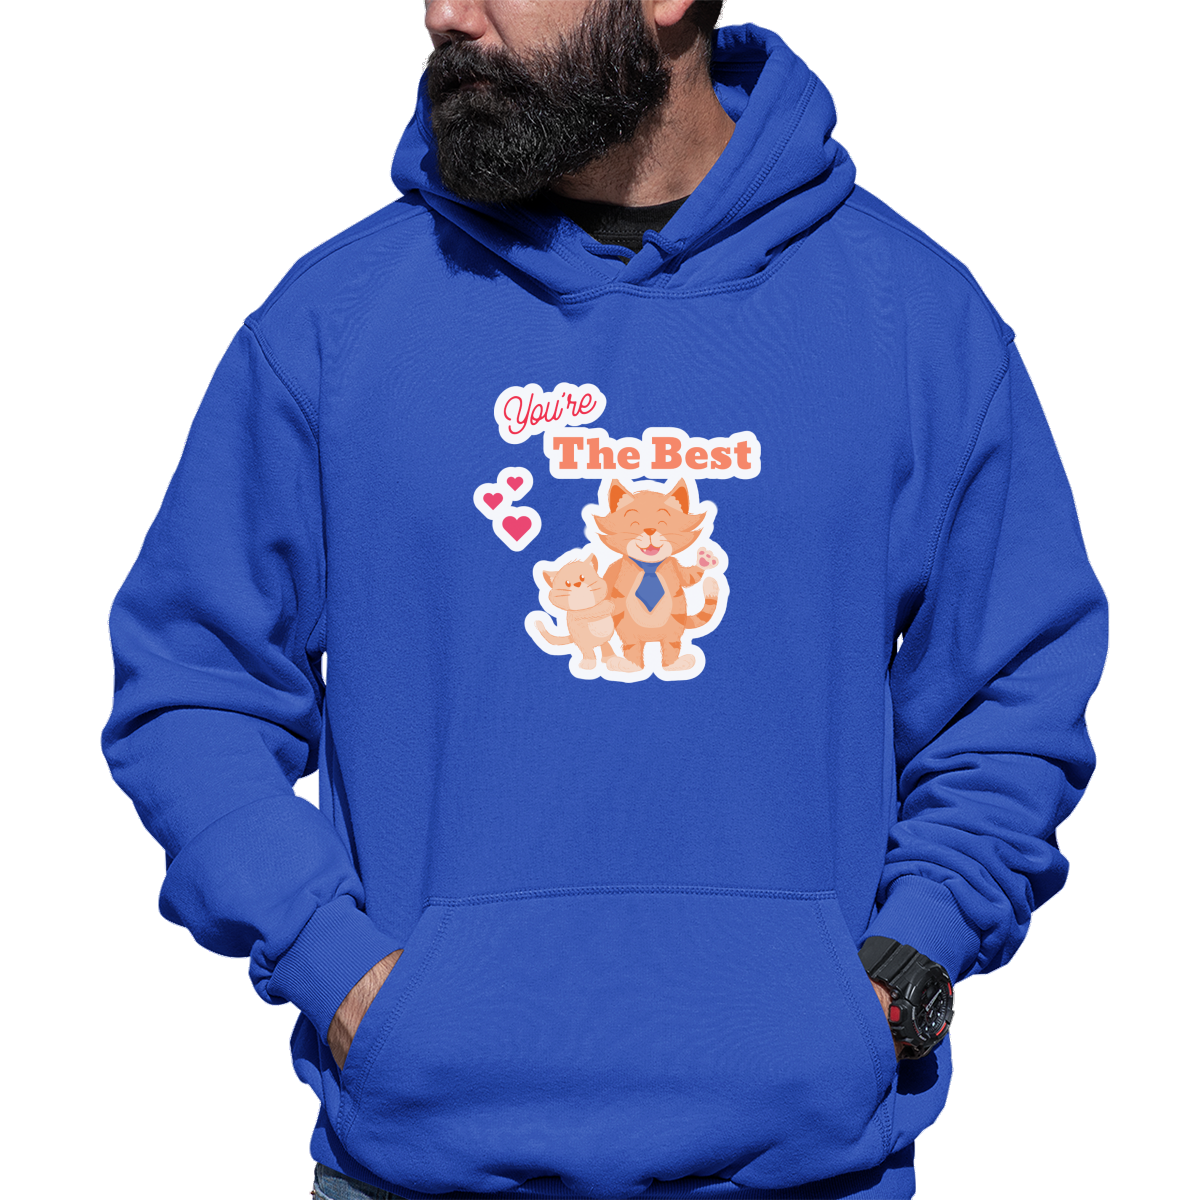 You are the best Unisex Hoodie | Blue